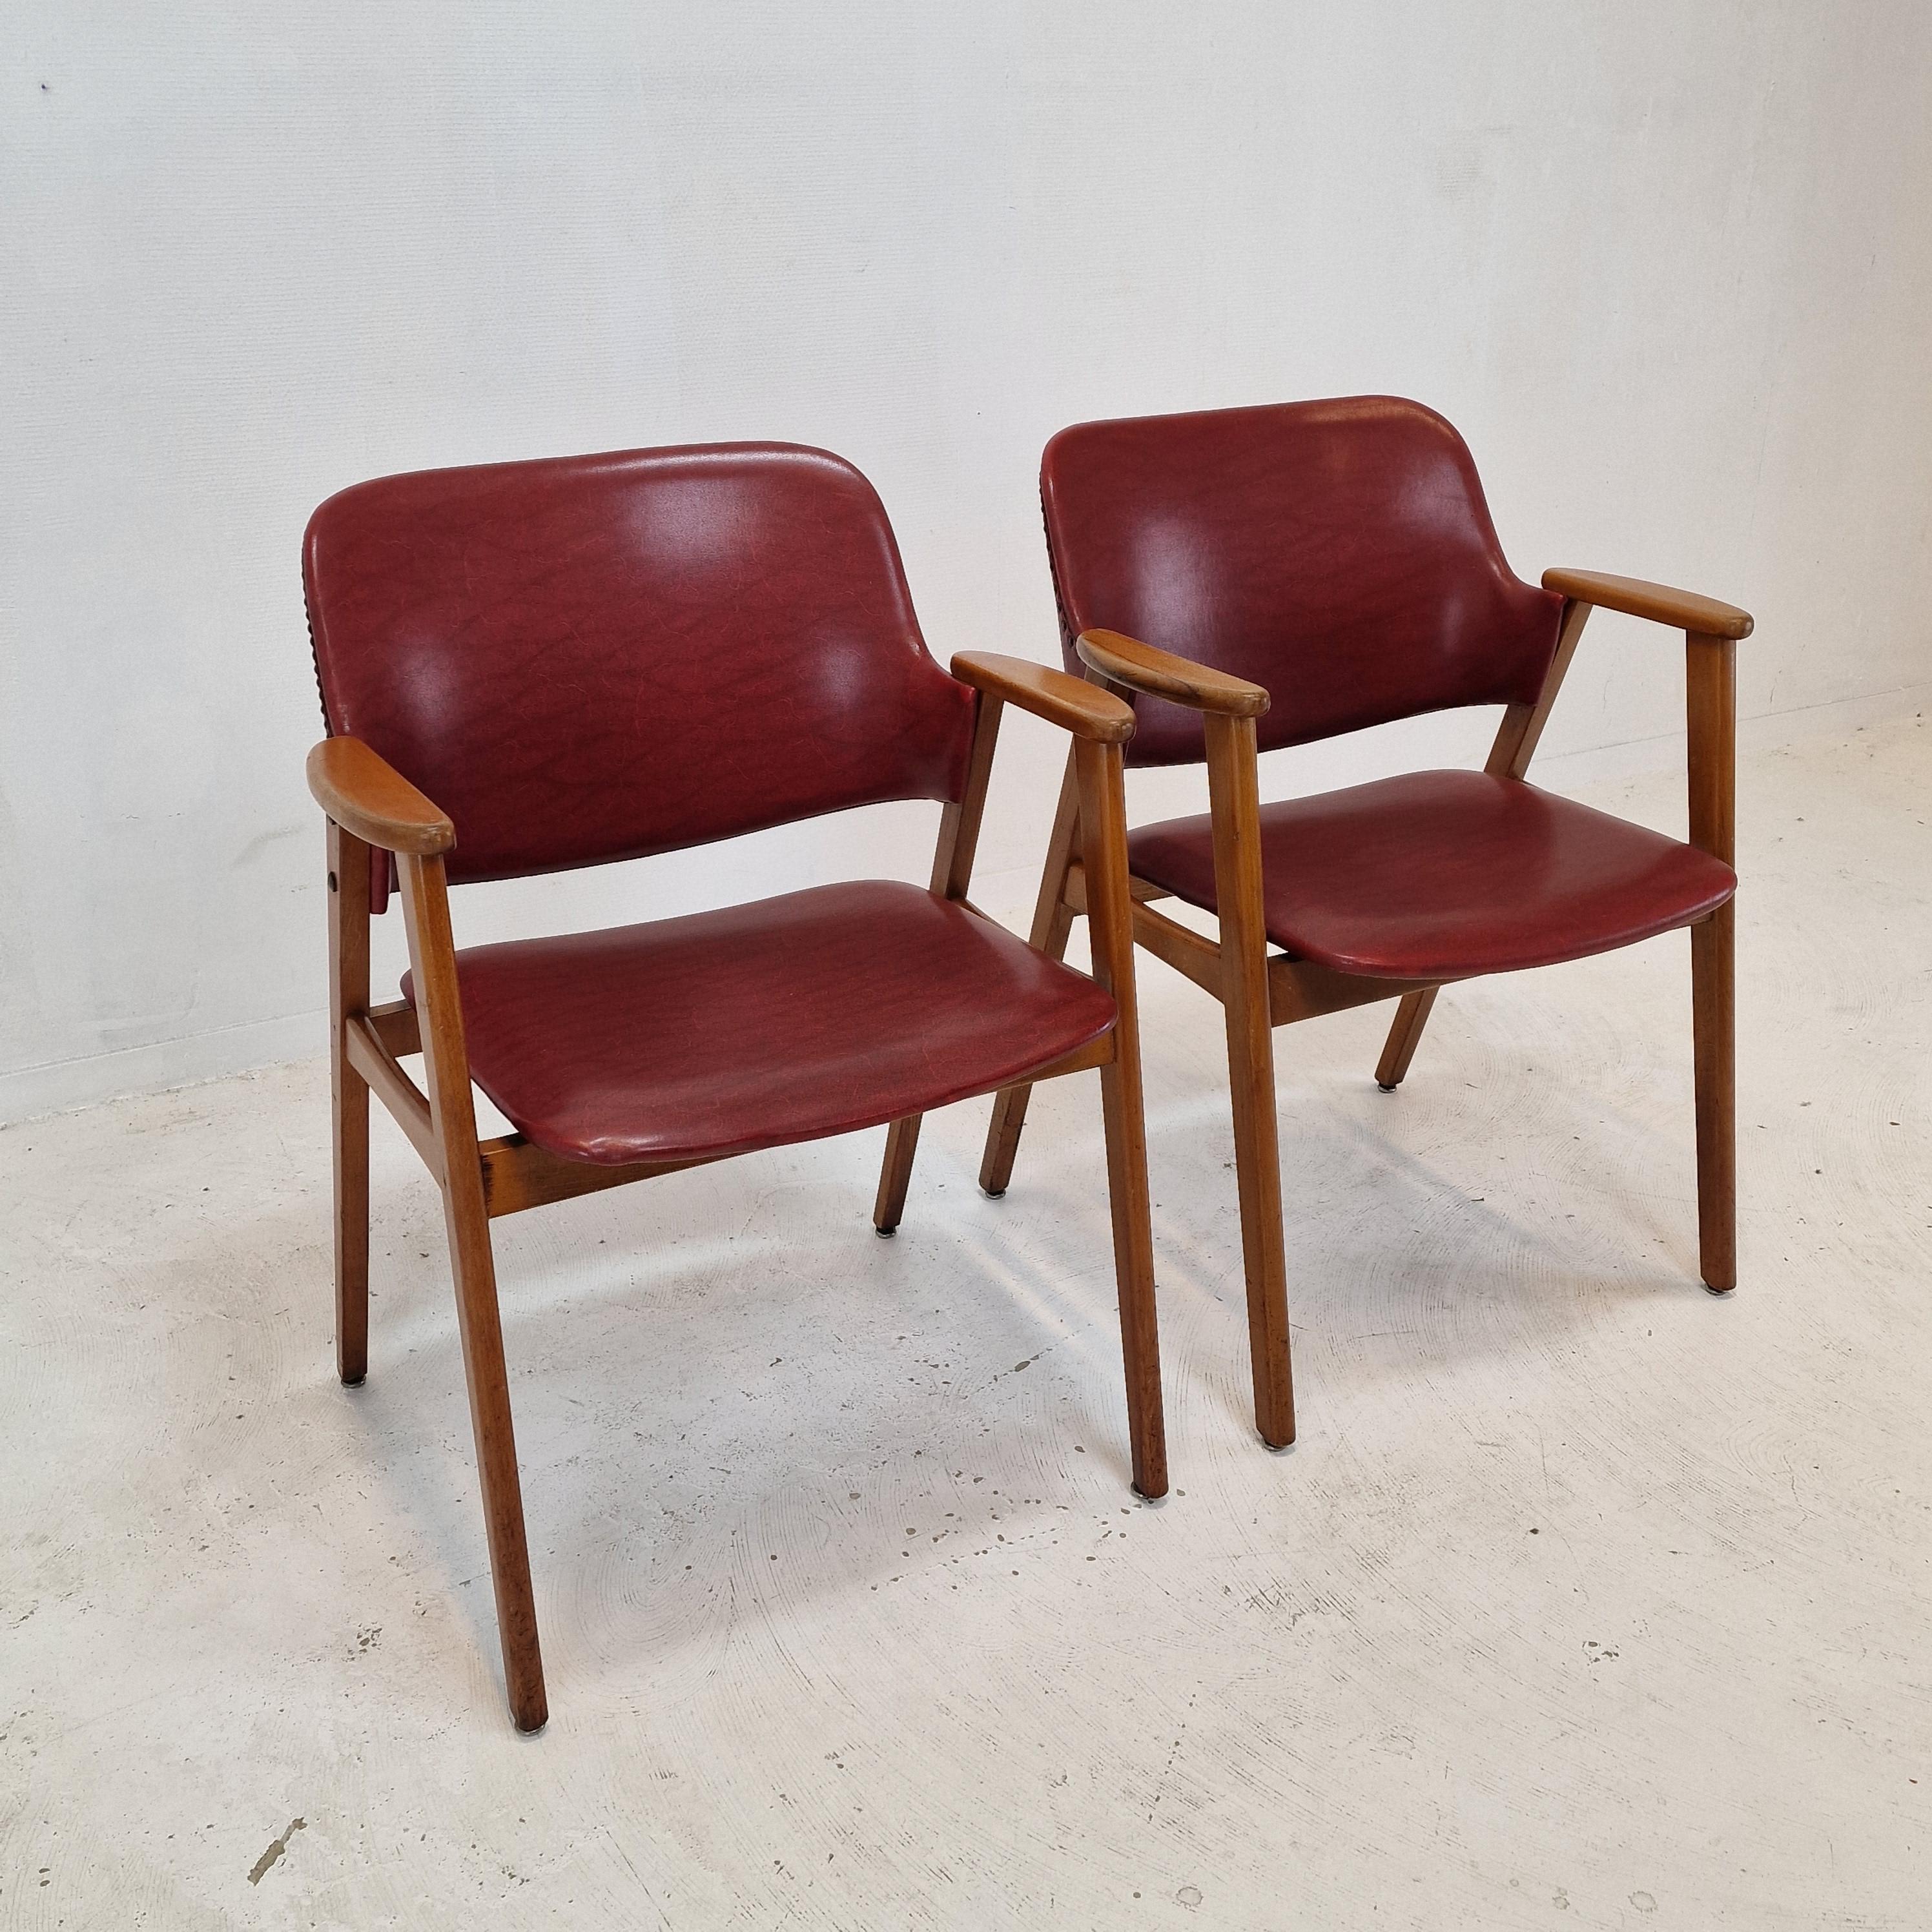 Mid-Century Modern Midcentury Dining or Restaurant Chairs by Cees Braakman for Pastoe, 1950s For Sale